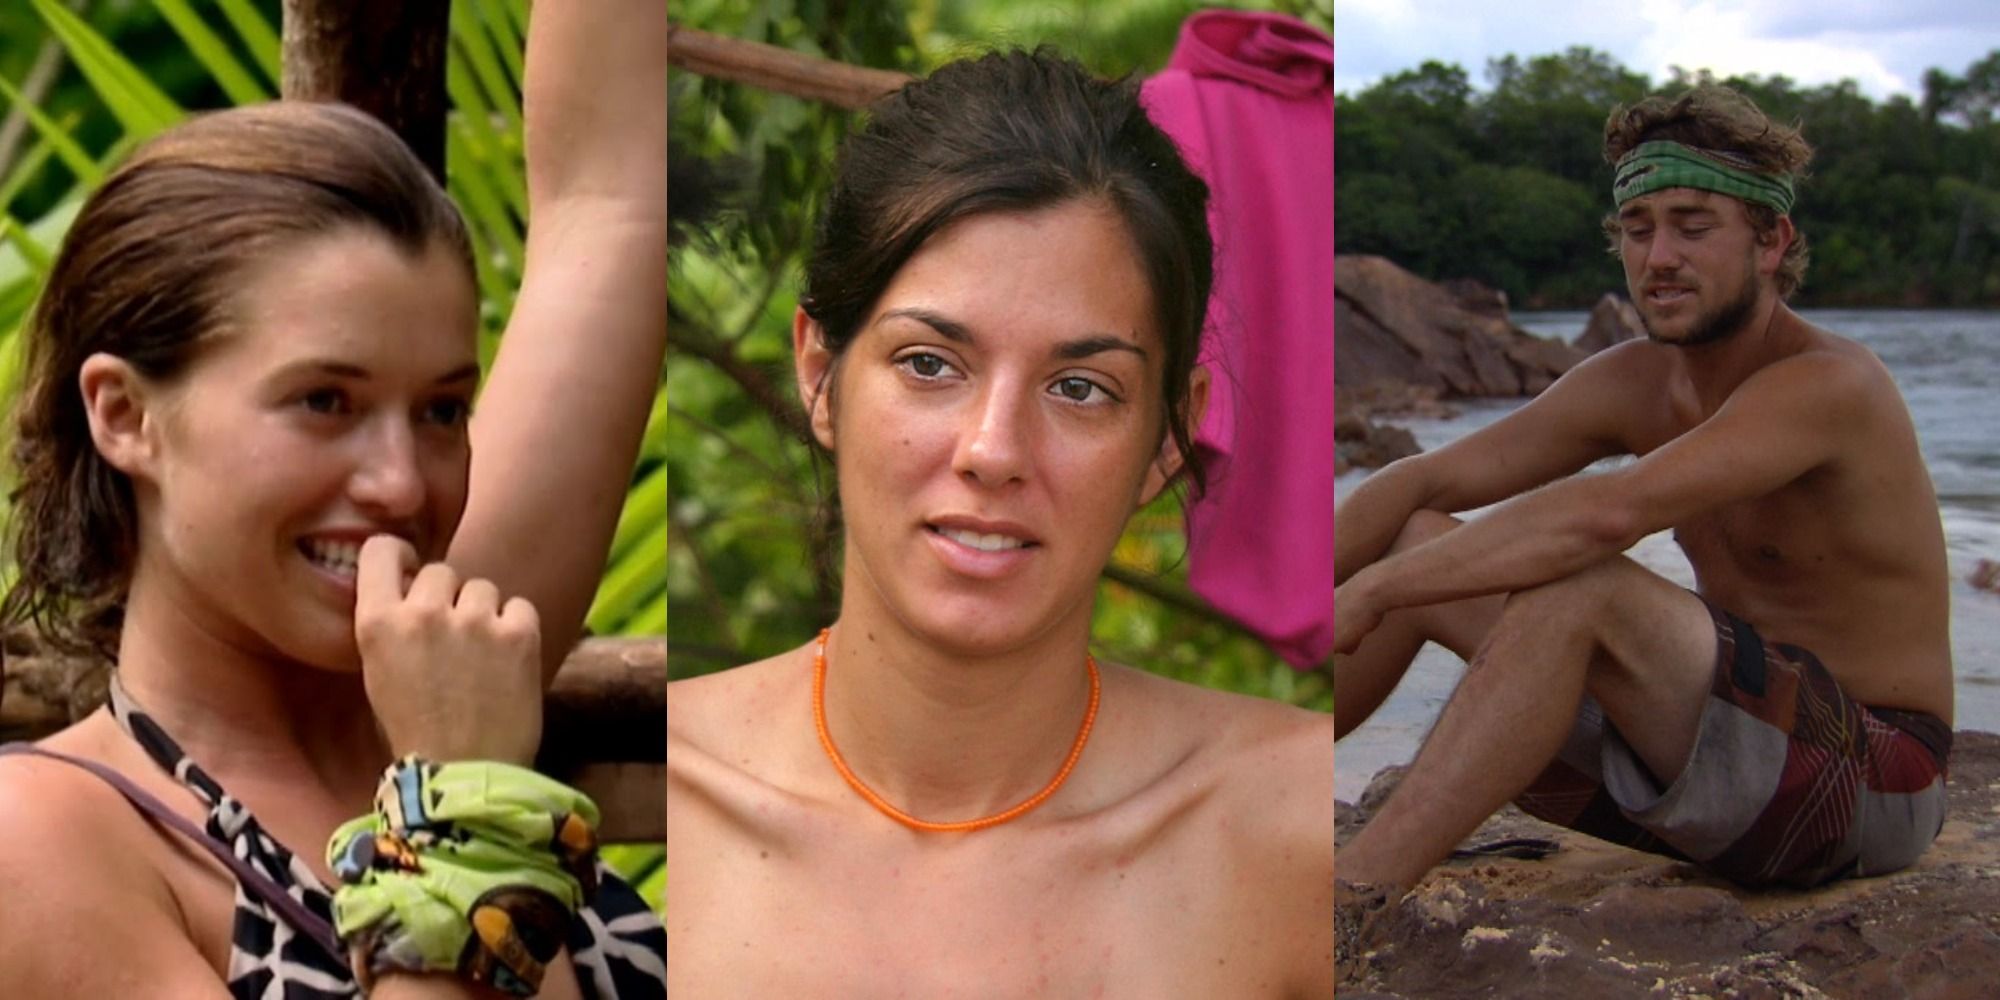 Three images side by side of Parvati Shallow, Jenna Morasca, and J.T. Thomas from Survivor